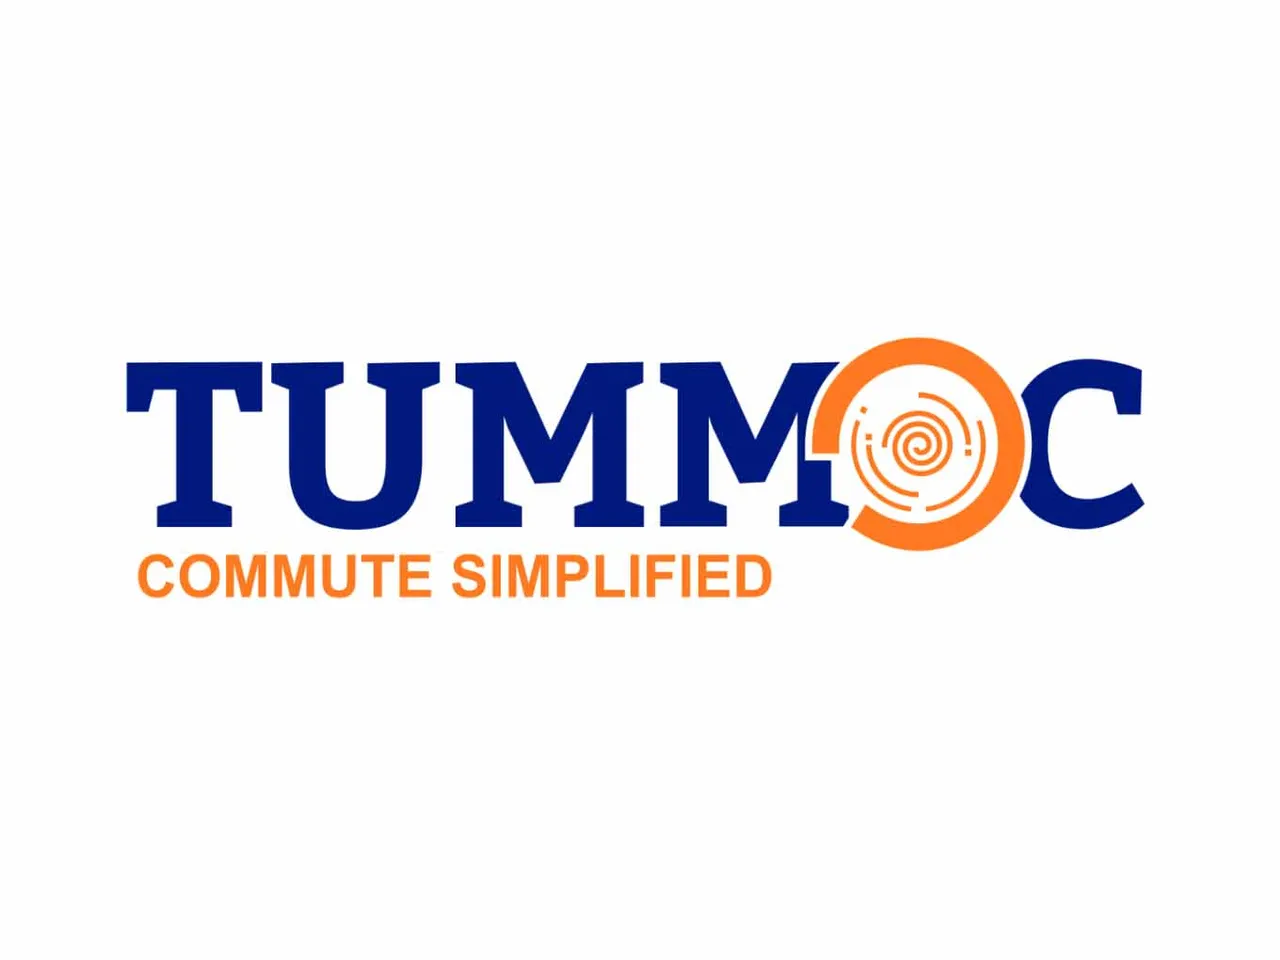 Mobility startup Tummoc raises $540K in funding led by Angel investors